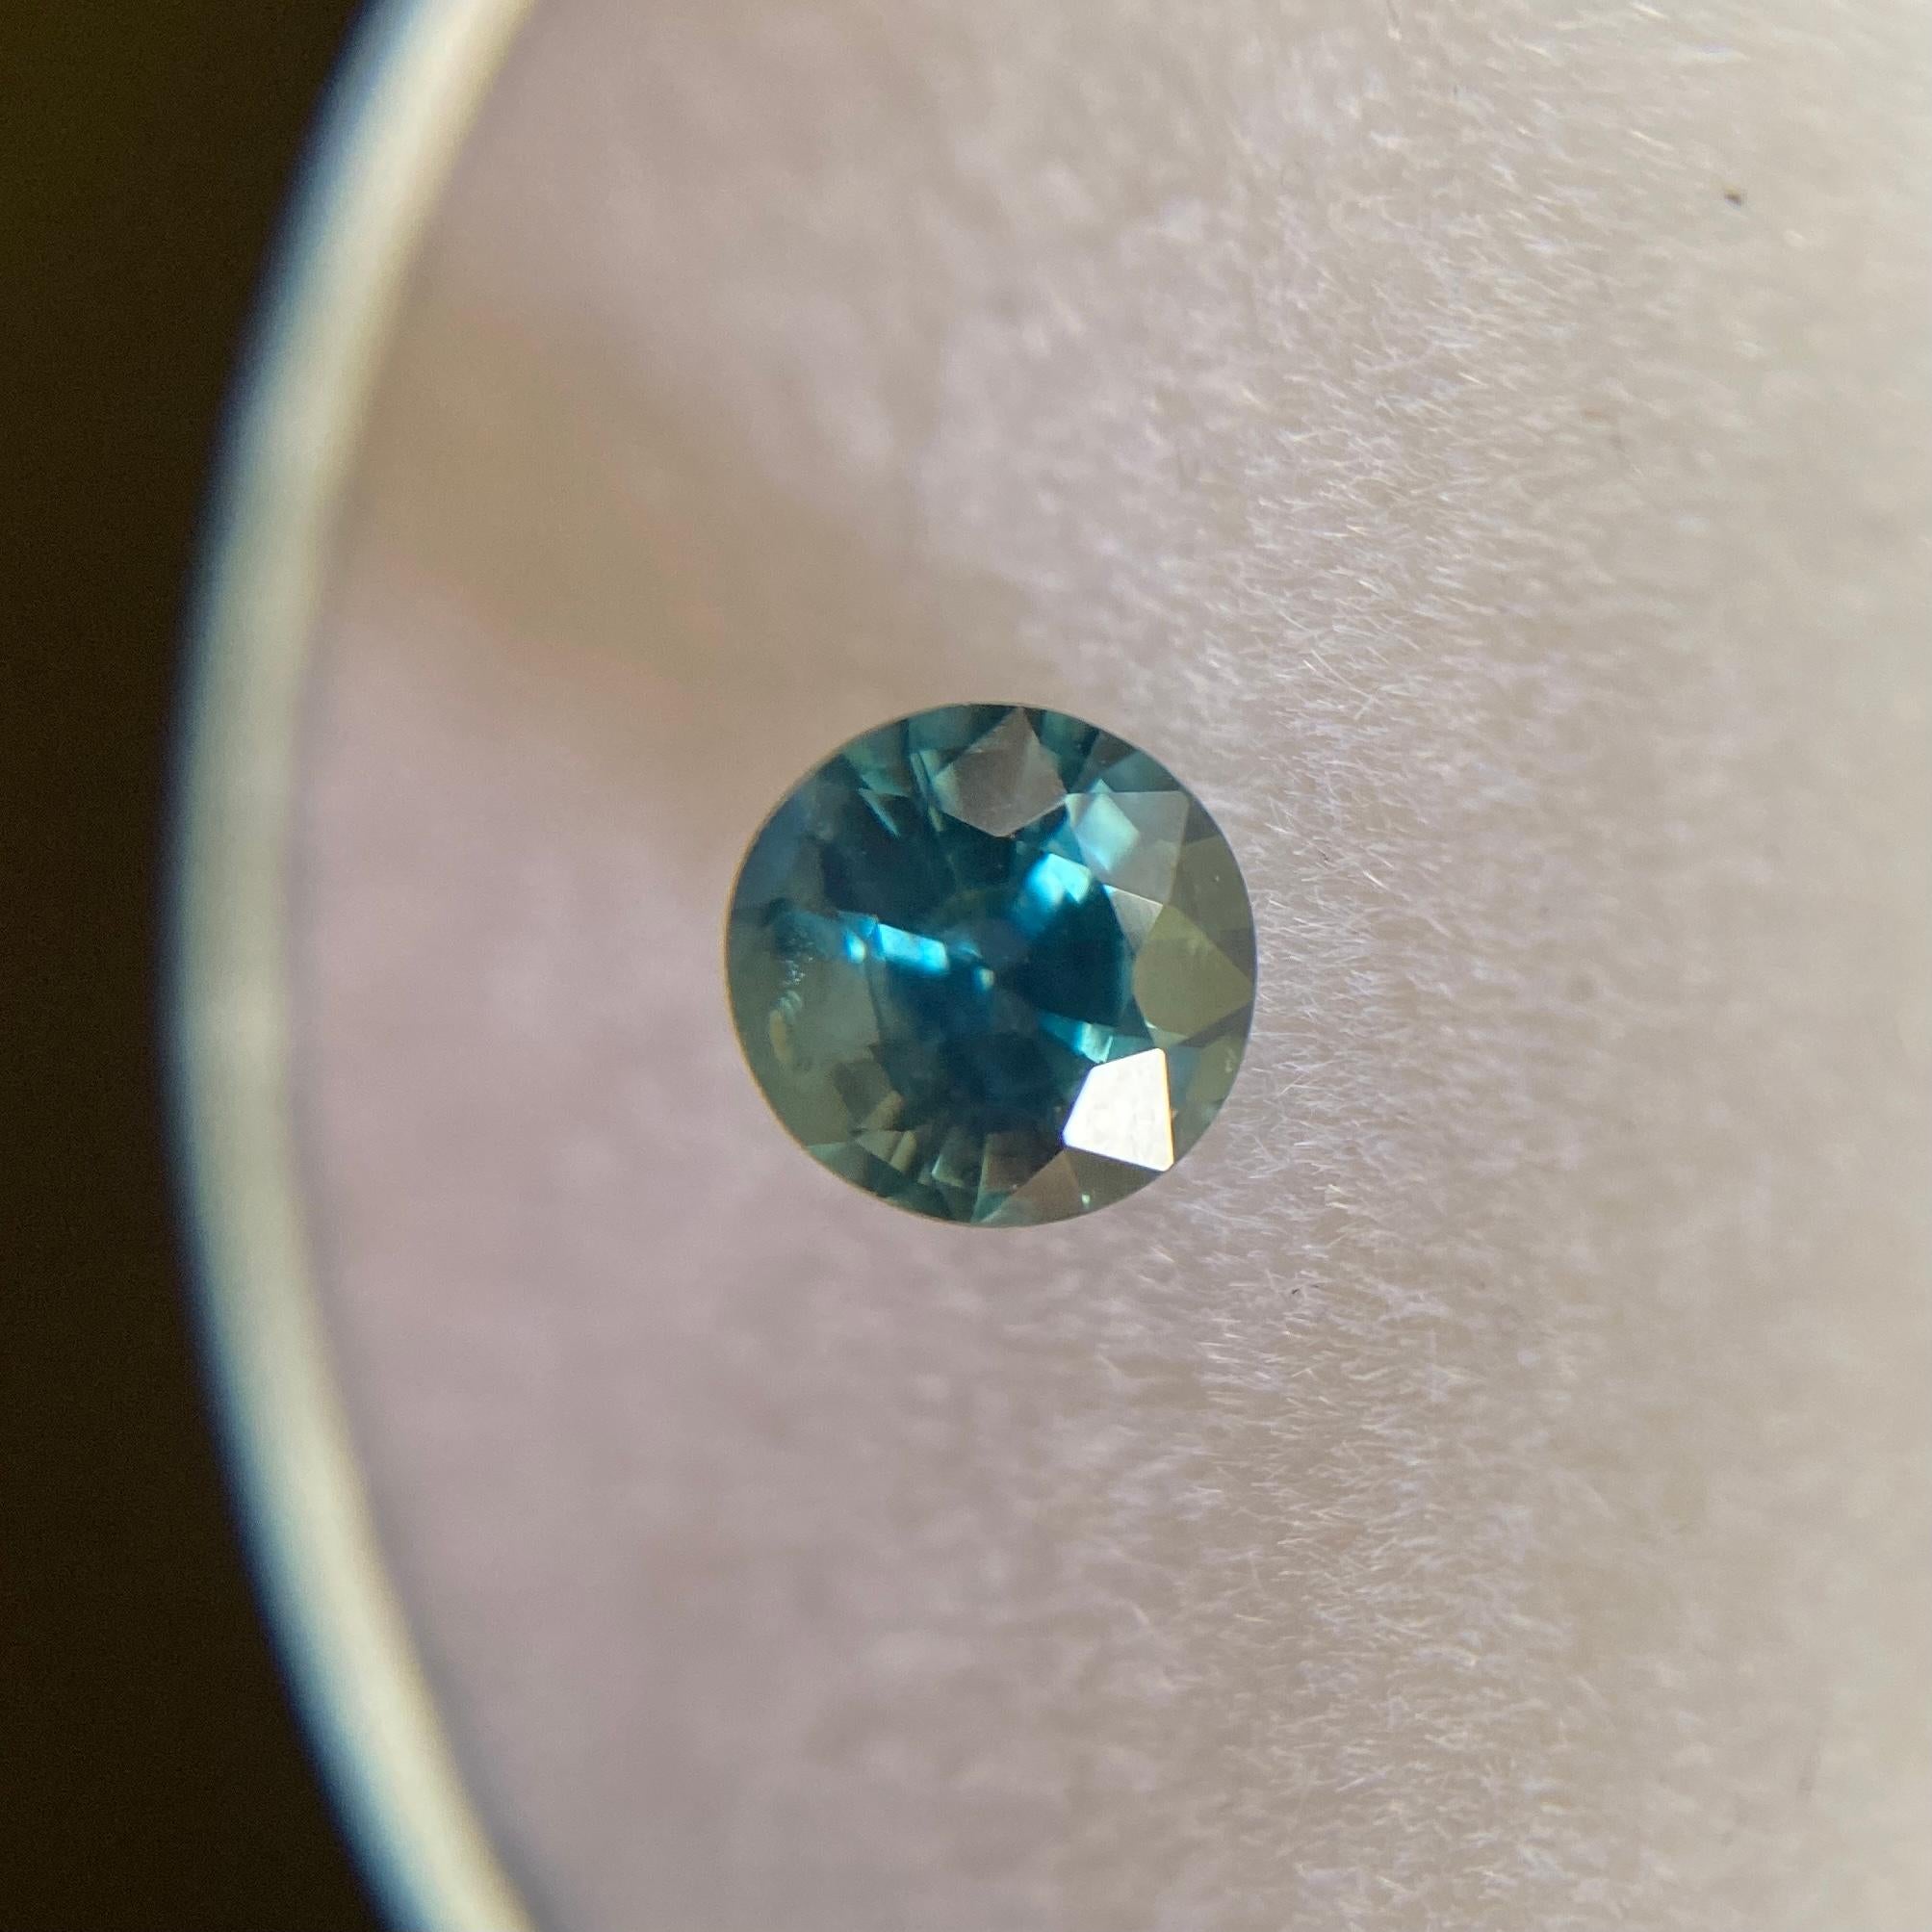 Natural Green Blue ‘Teal’ Australian Sapphire Gemstone.

0.55 Carat with a beautiful and unique green blue teal colour and very good clarity, a clean stone with only some small natural inclusions visible when looking closely.

Also has an excellent